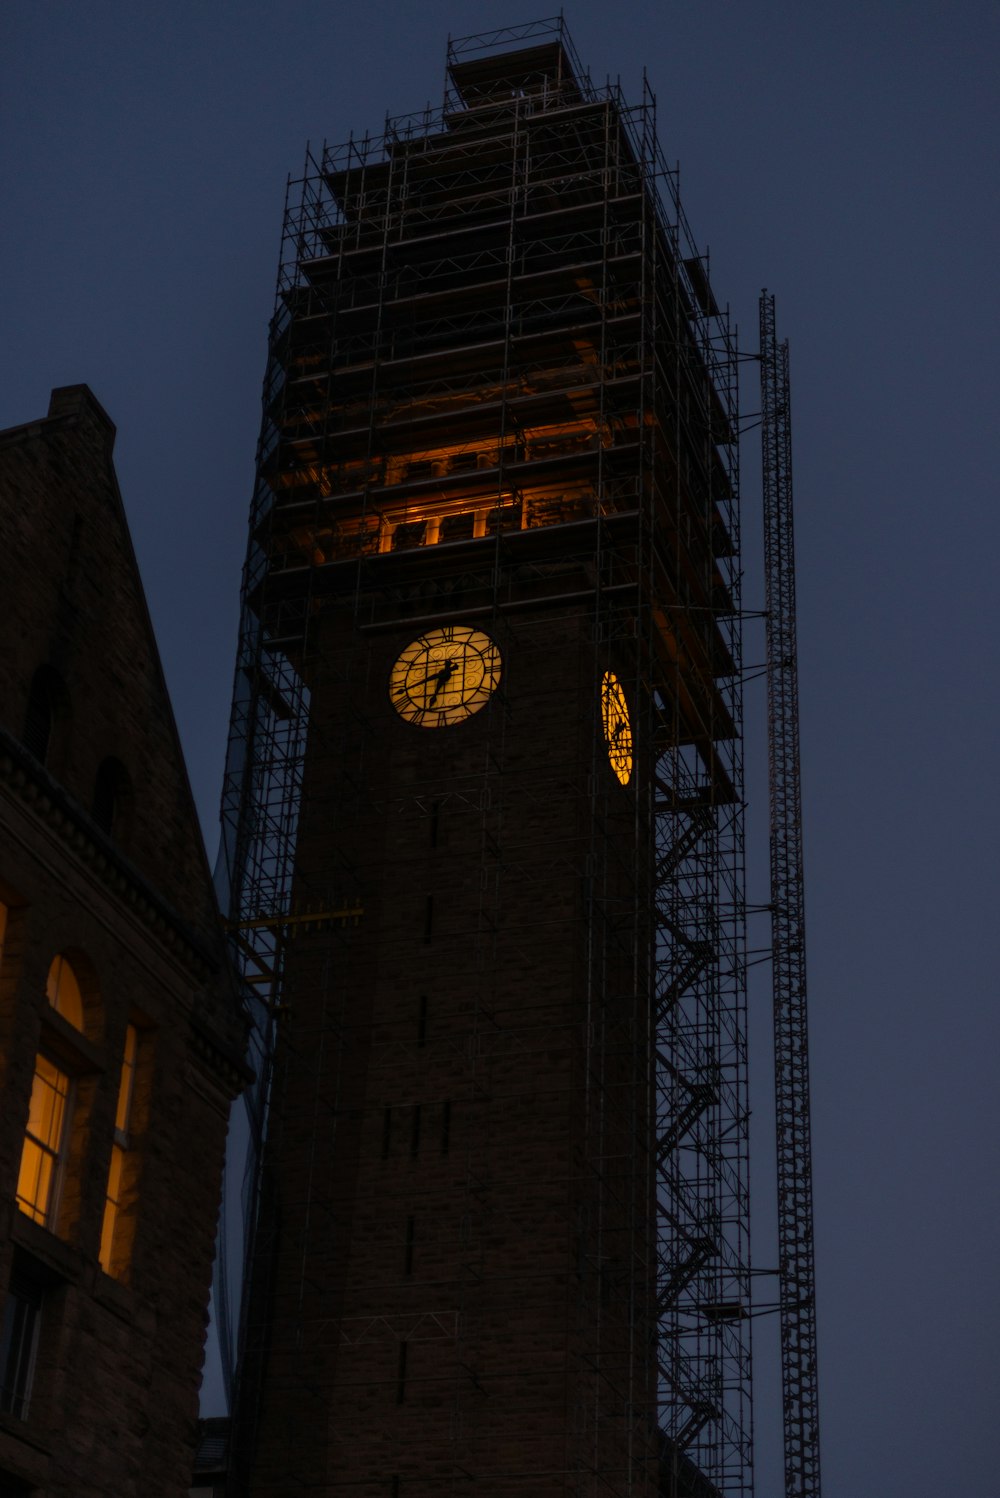 a clock tower with scaffolding around it at night